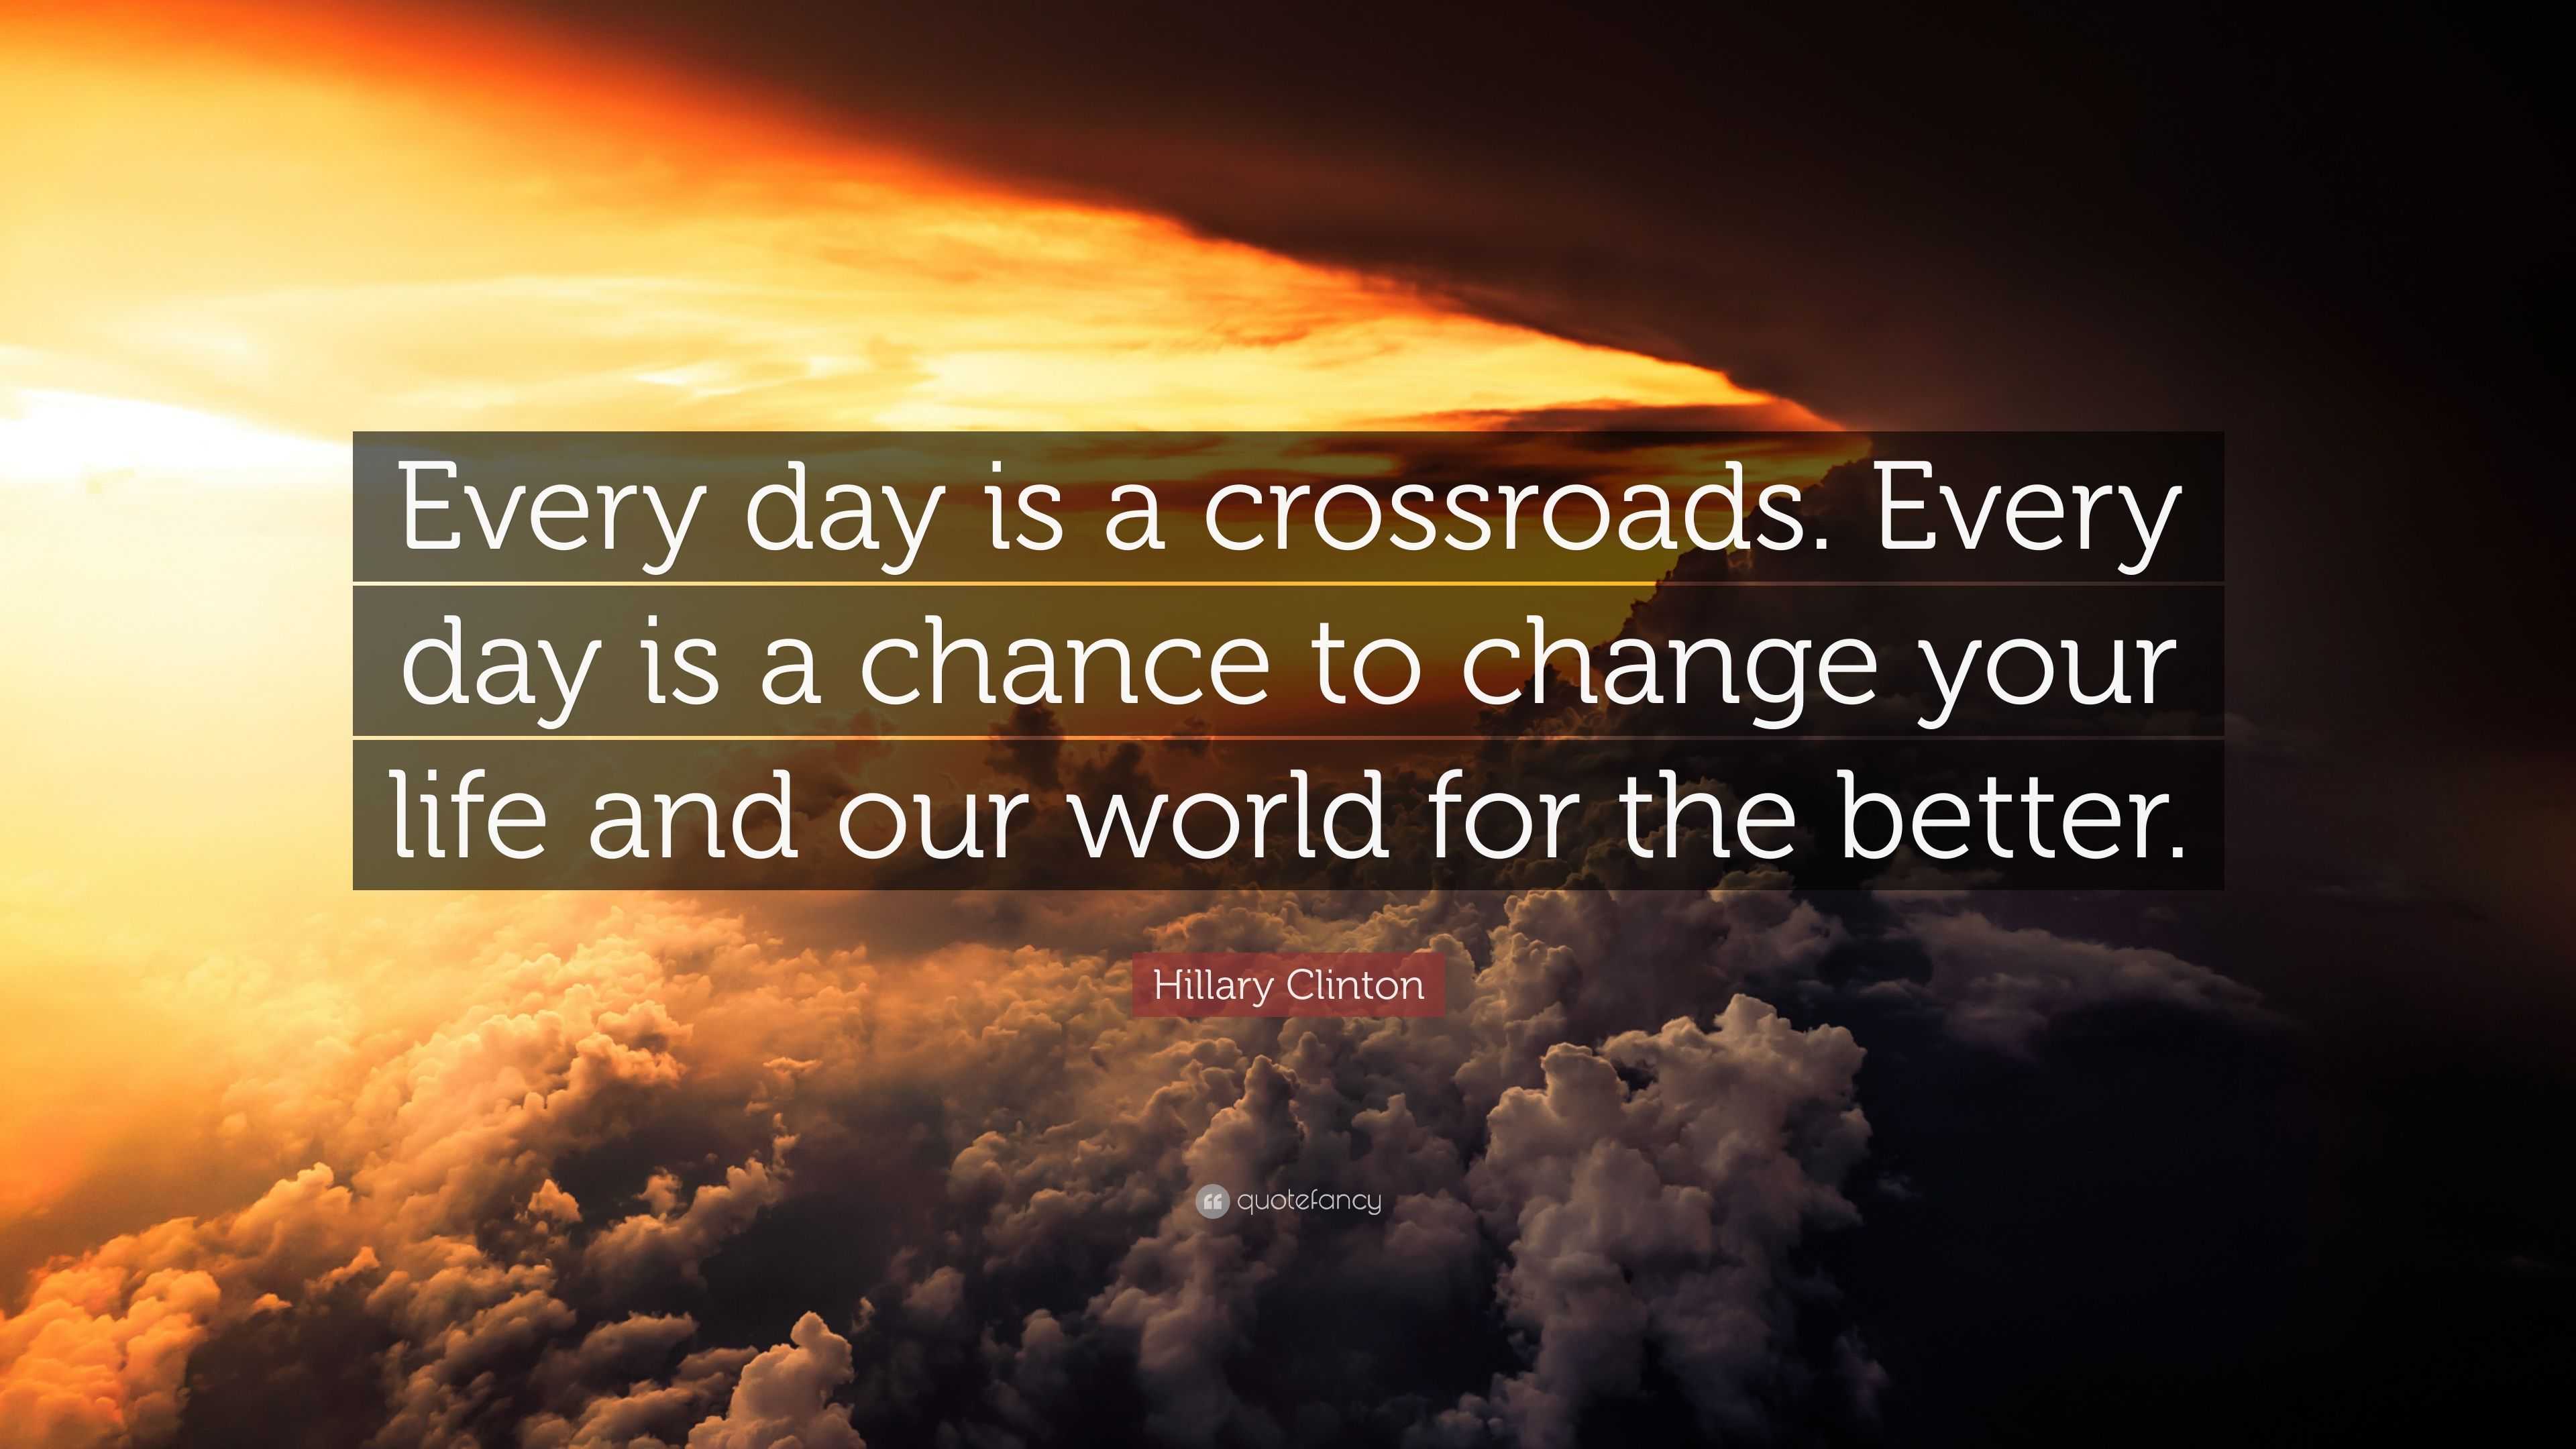 Hillary Clinton Quote: “Every day is a crossroads. Every day is a